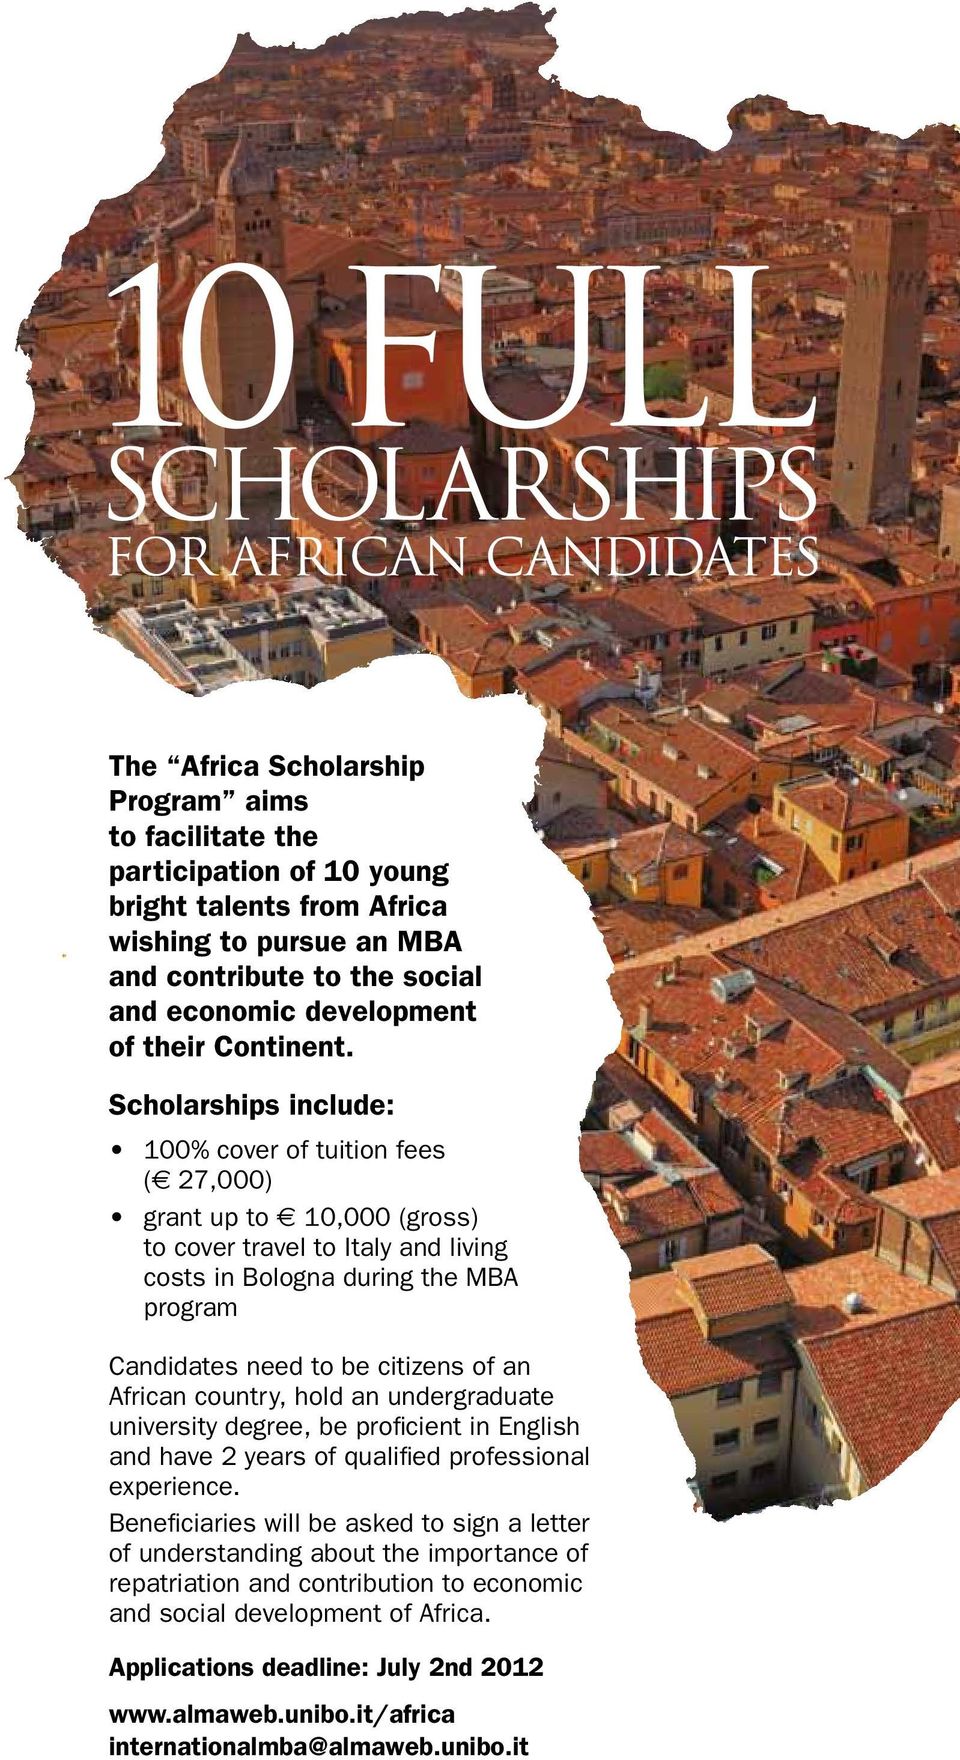 Scholarships include: 100% cover of tuition fees ( 27,000) grant up to 10,000 (gross) to cover travel to Italy and living costs in Bologna during the MBA program Candidates need to be citizens of an